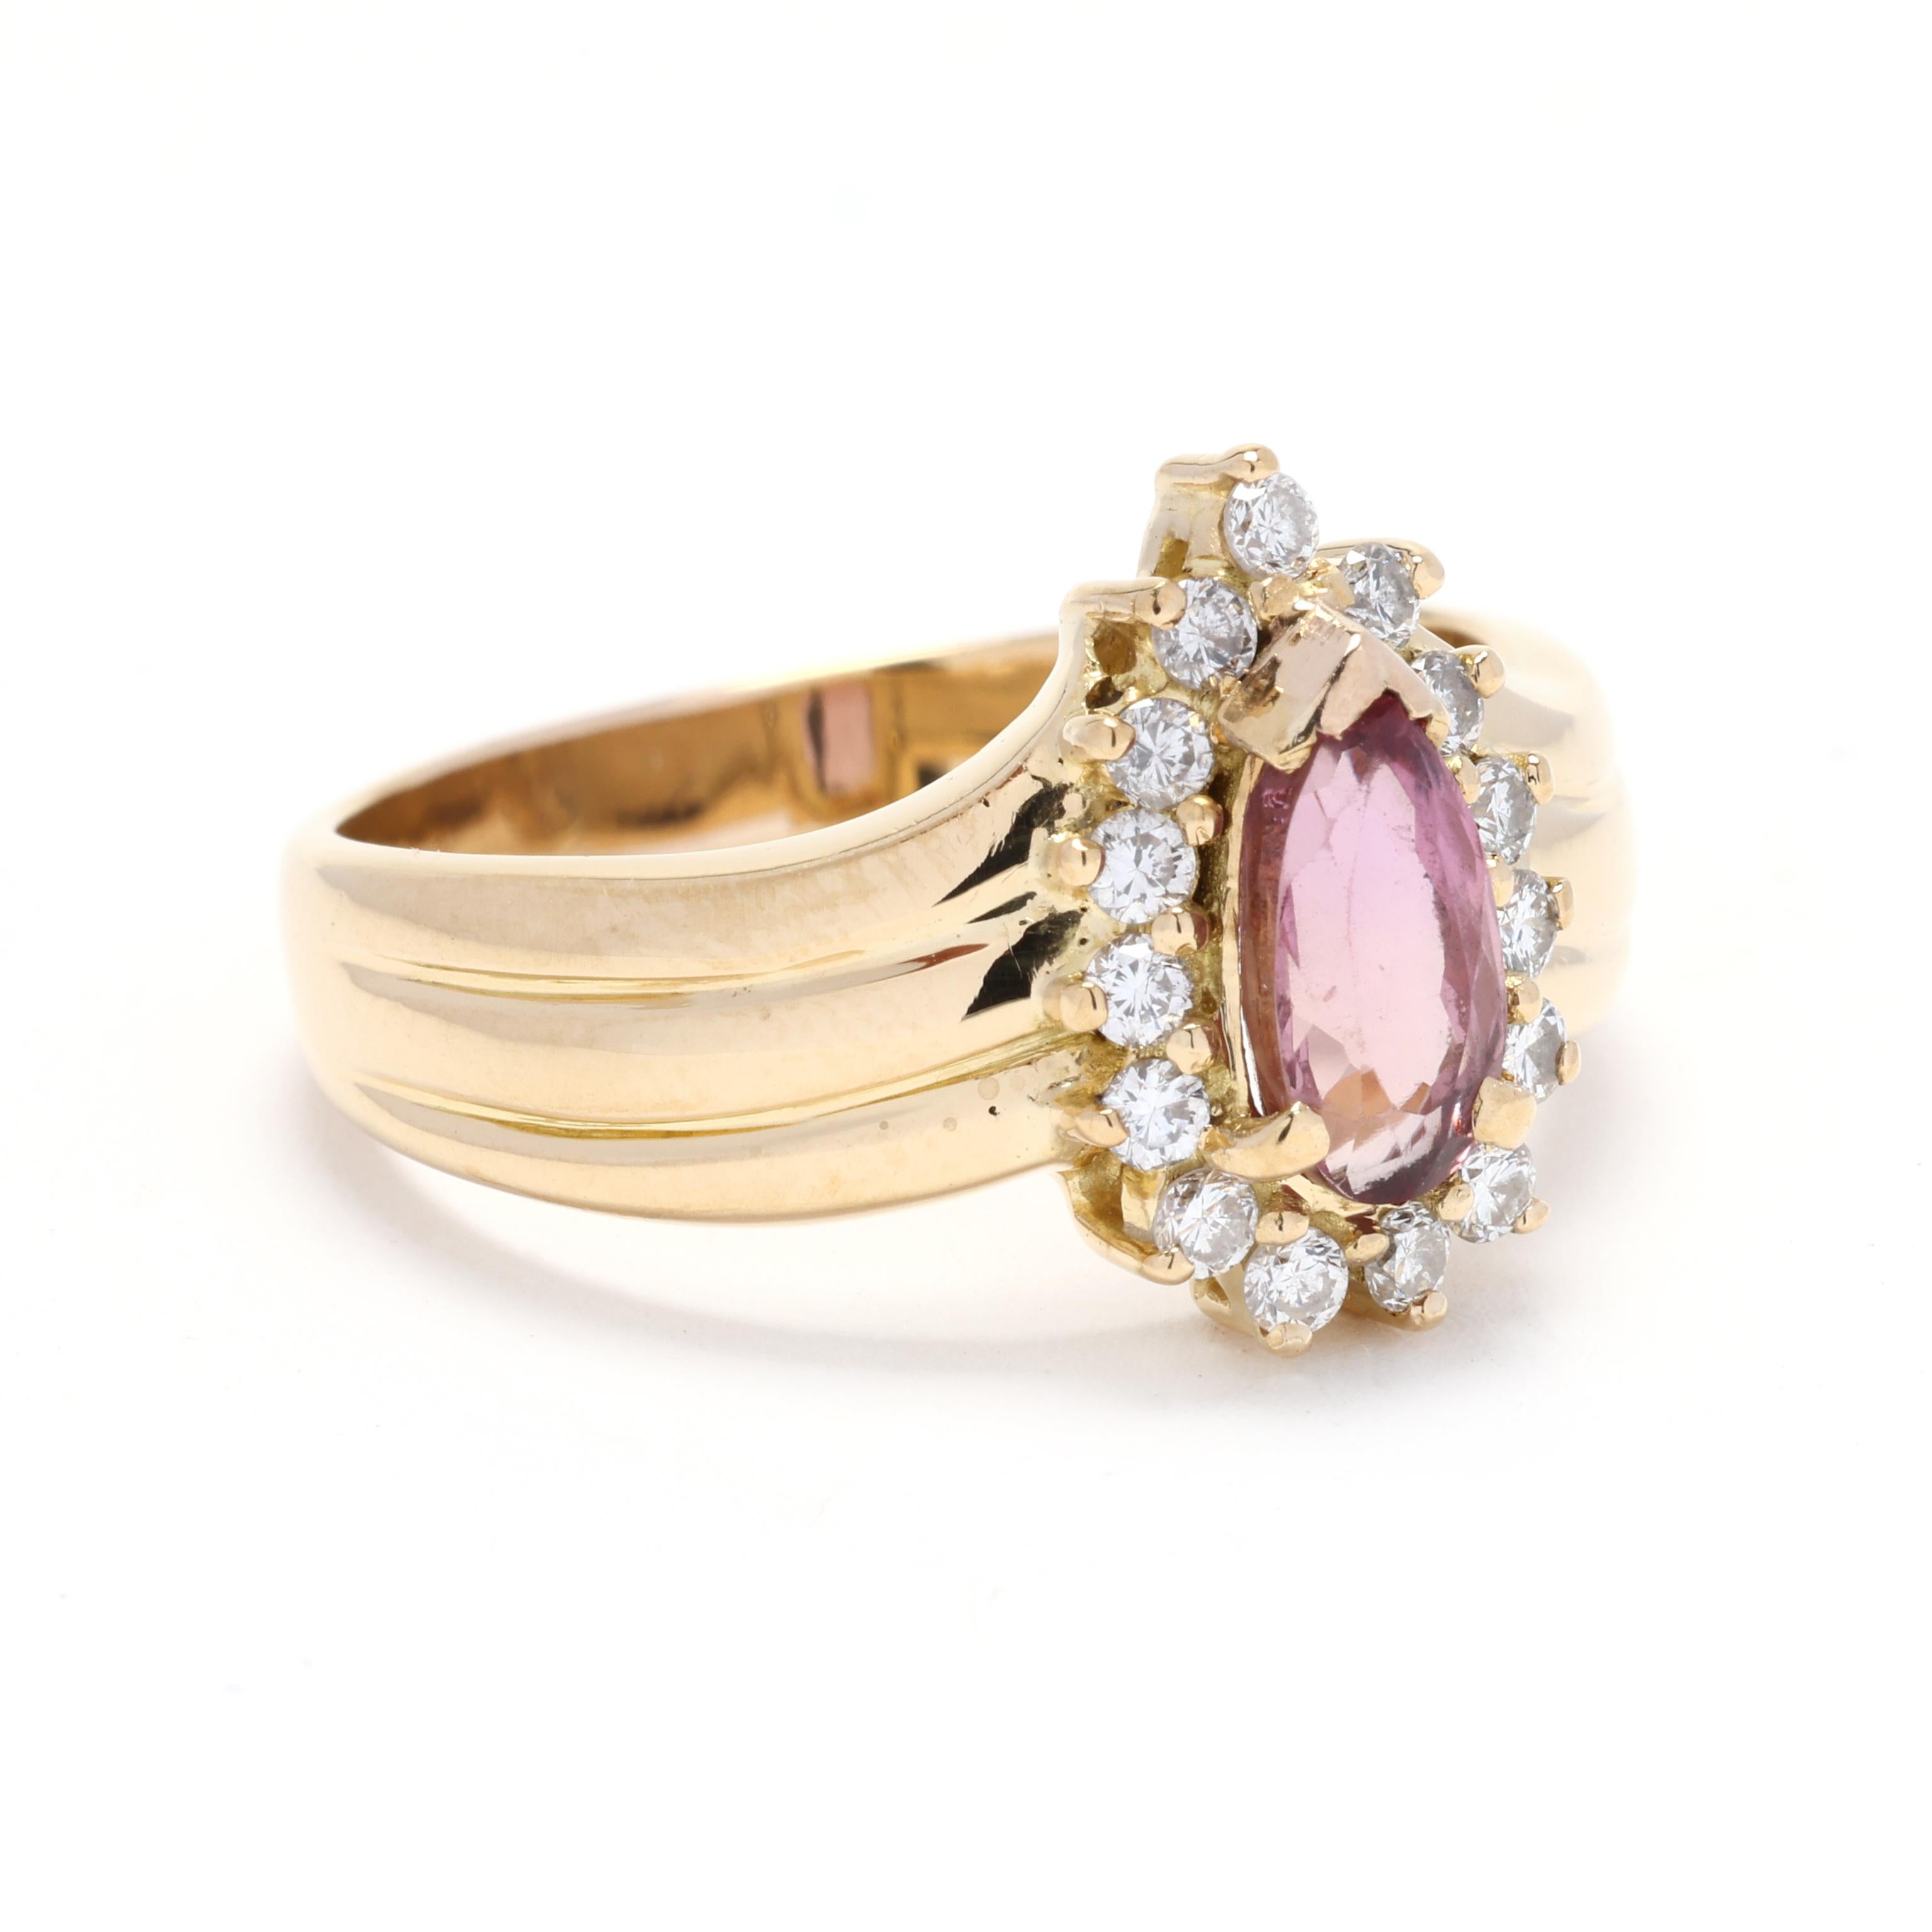 Add a touch of glamour to your jewelry collection with this 1.6 carat pink tourmaline and diamond halo ring. Crafted in 18k yellow gold, this stunning ring features a oval-cut pink tourmaline as the centerpiece. The pink tourmaline is surrounded by